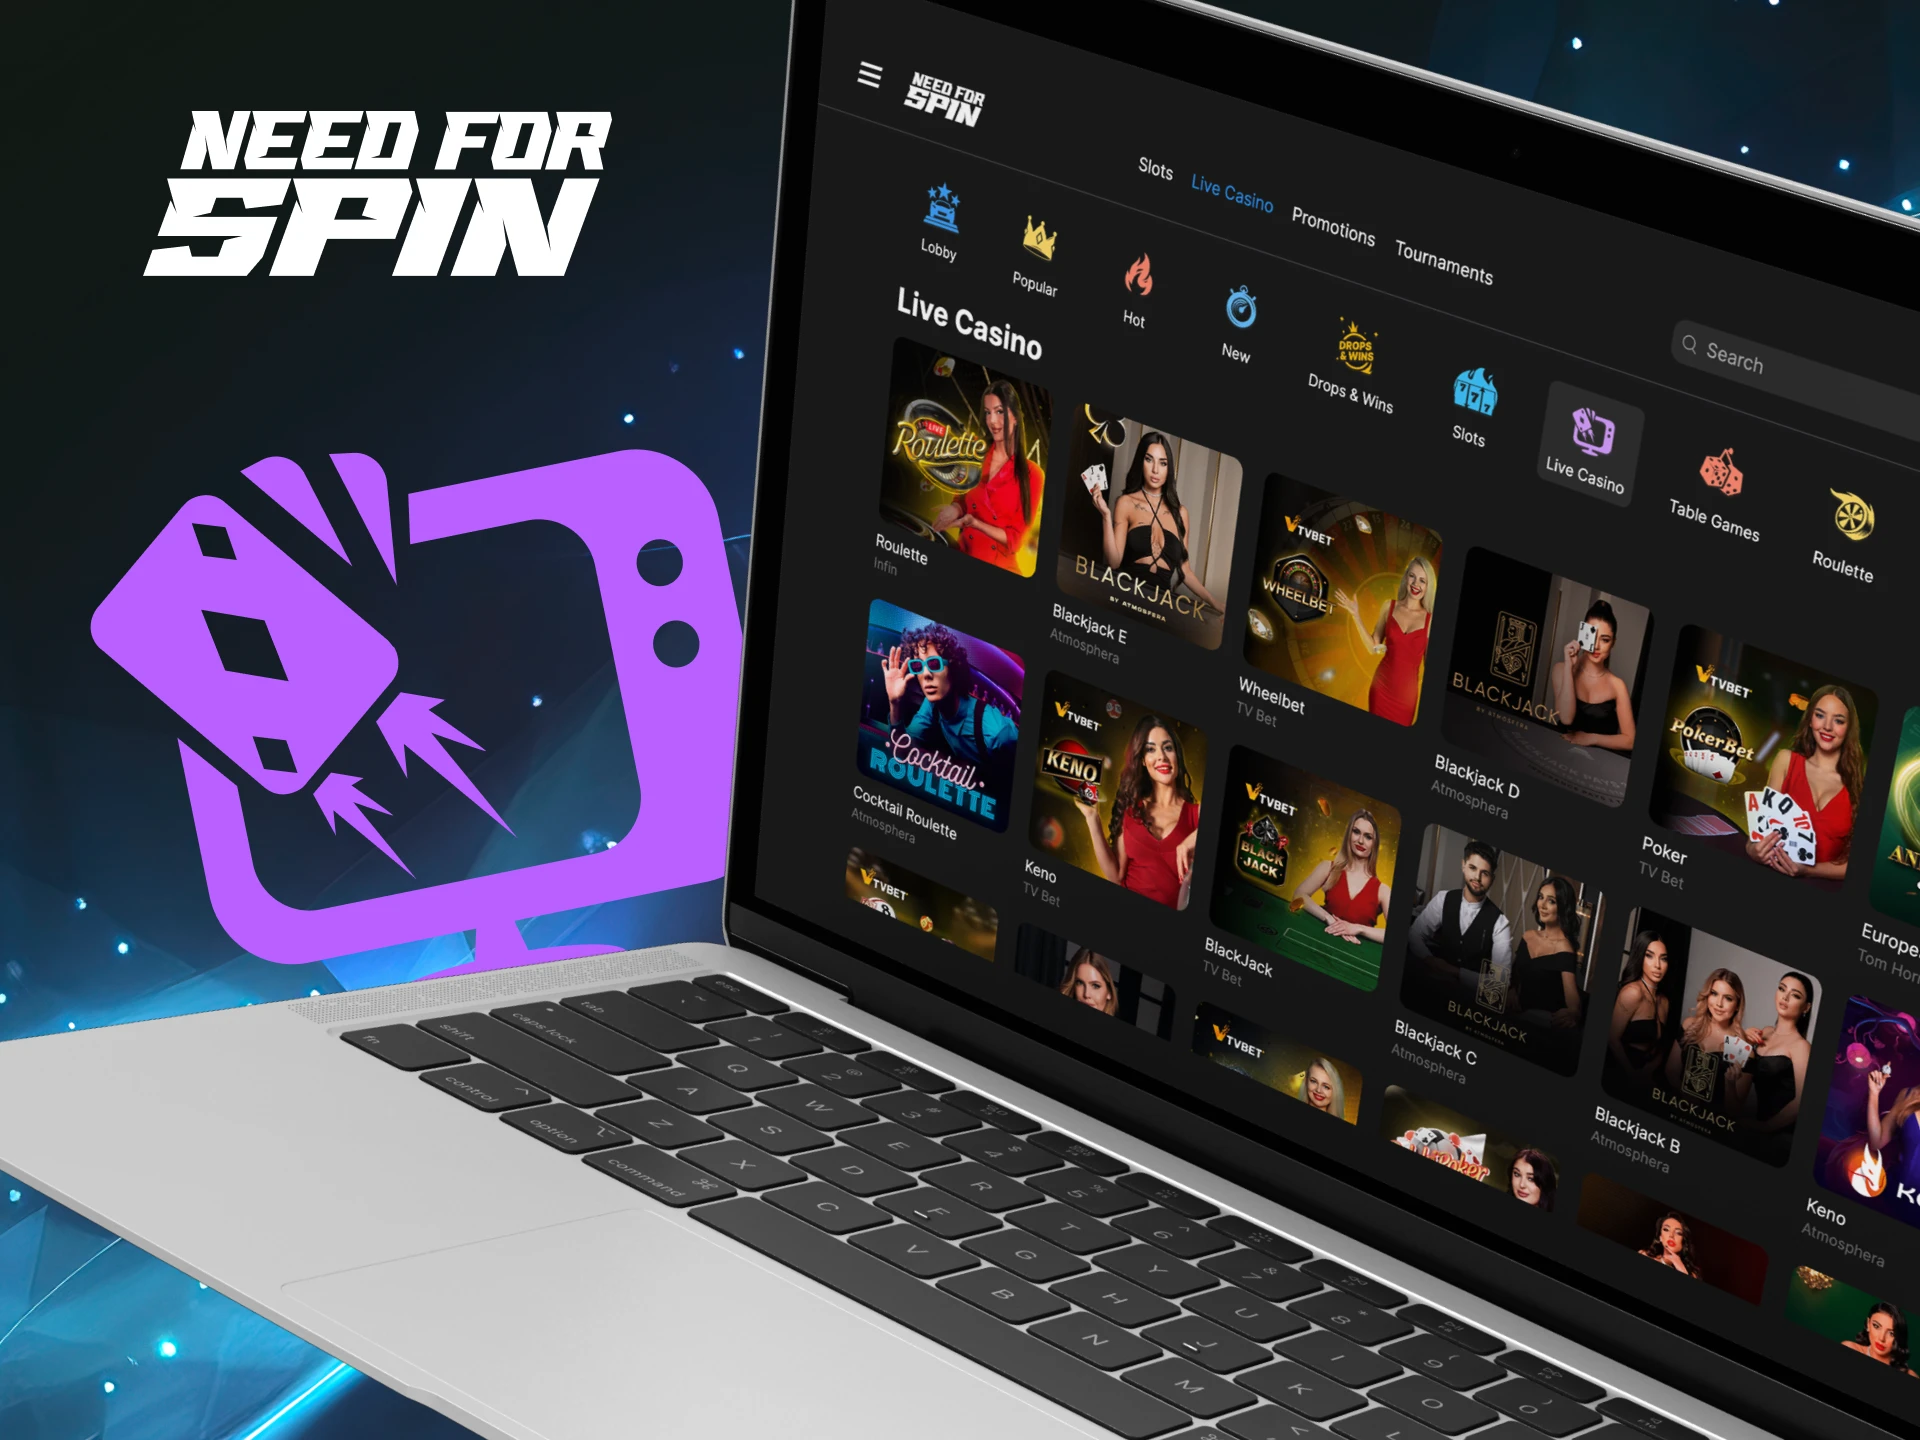 What live casino games are there on the Need For Spin online casino website.